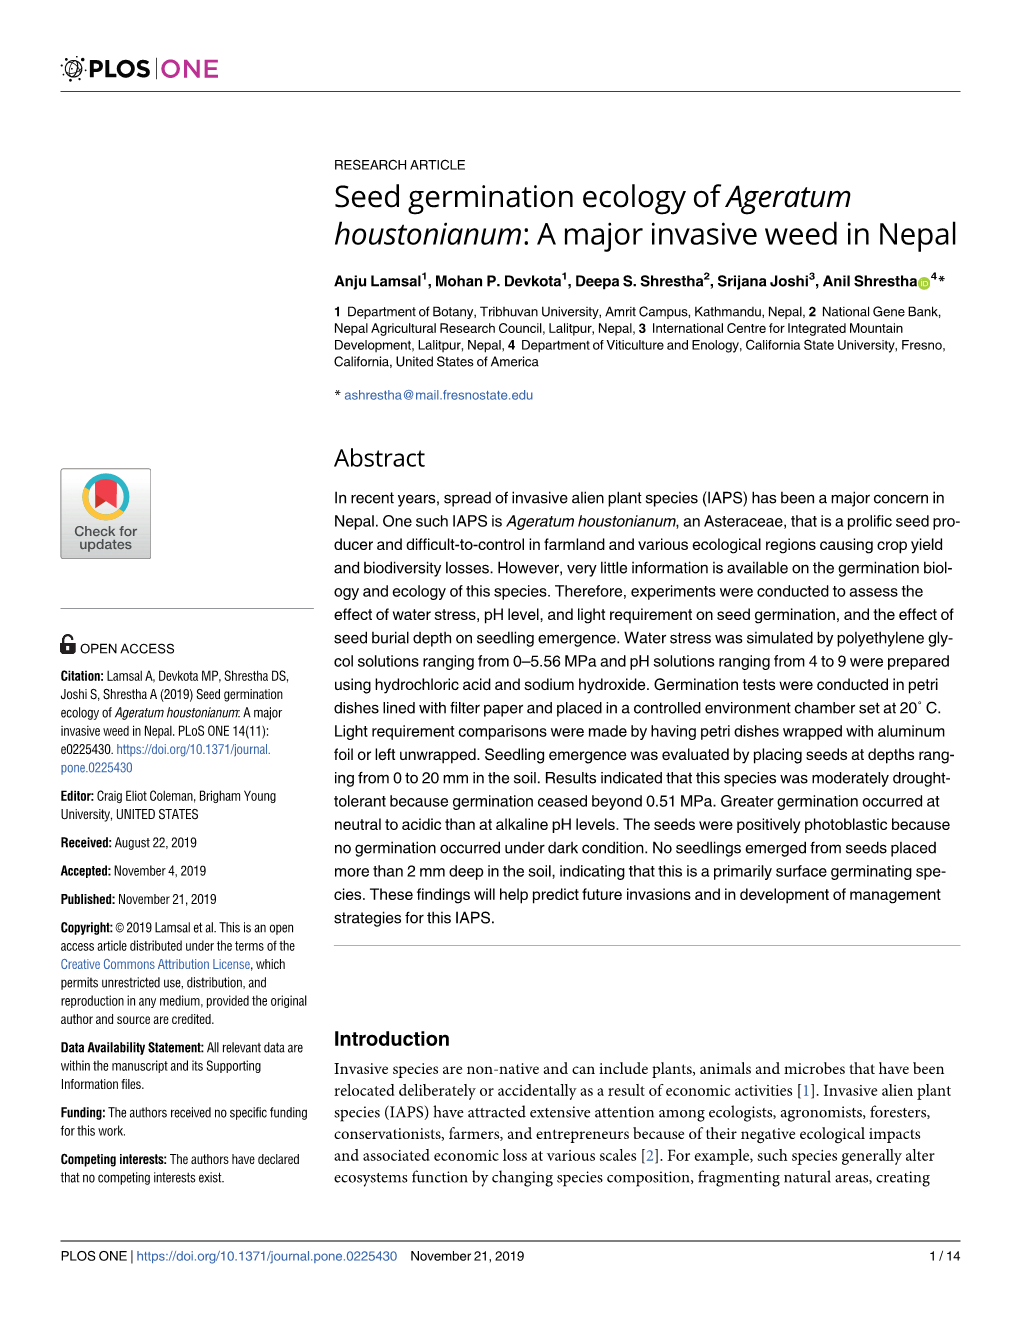 Seed Germination Ecology of Ageratum Houstonianum: a Major Invasive Weed in Nepal